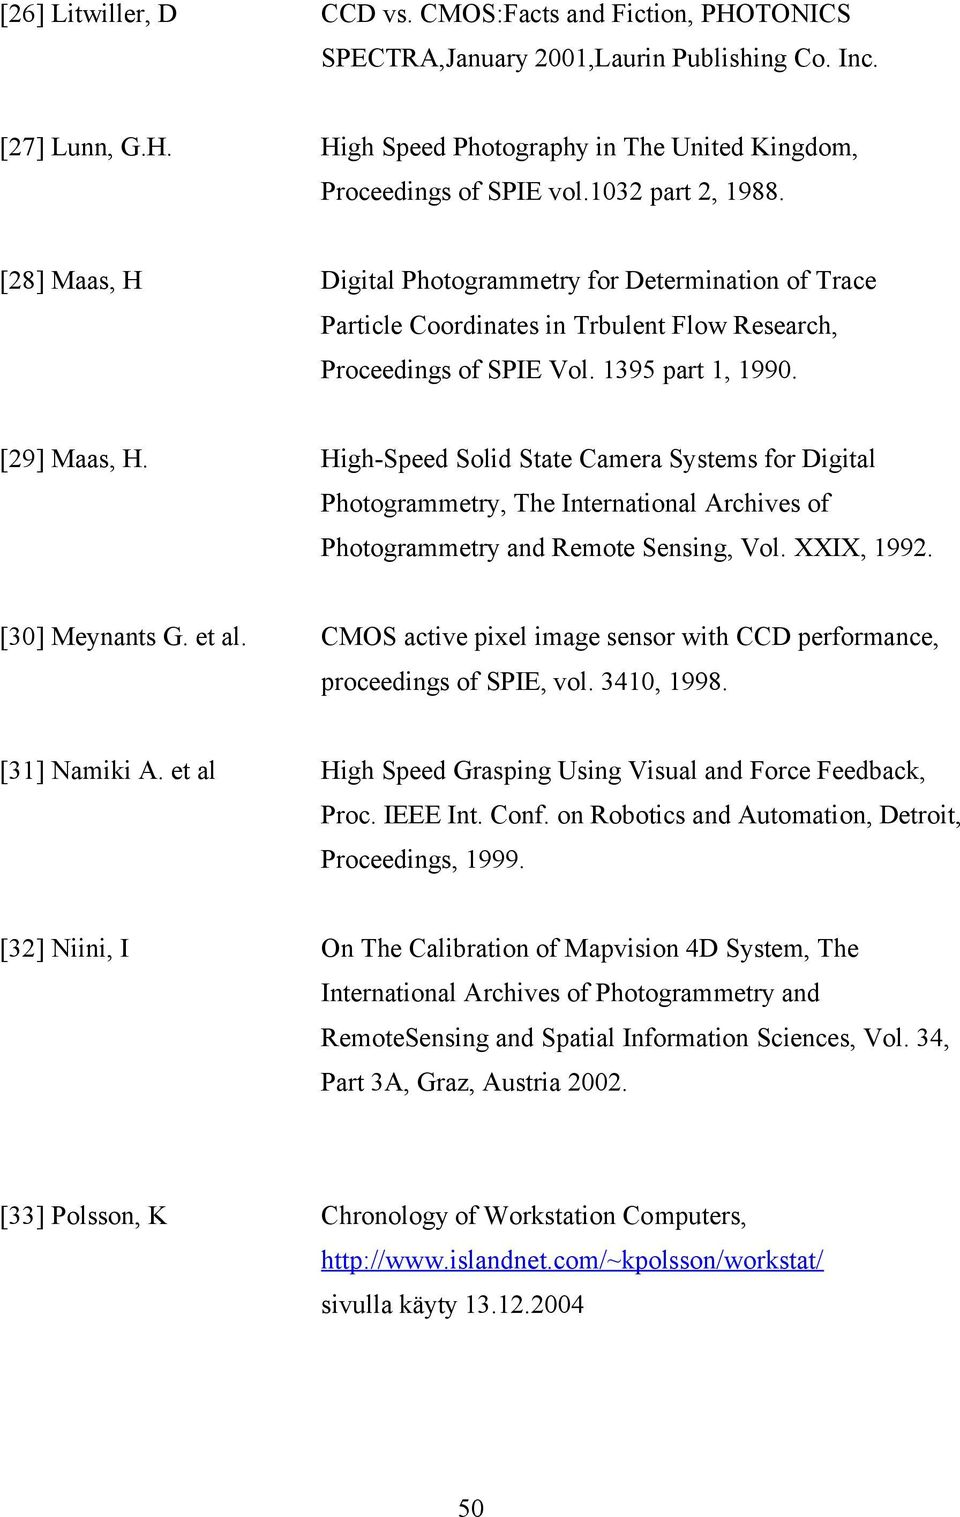 High-Speed Solid State Camera Systems for Digital Photogrammetry, The International Archives of Photogrammetry and Remote Sensing, Vol. XXIX, 1992. [30] Meynants G. et al.